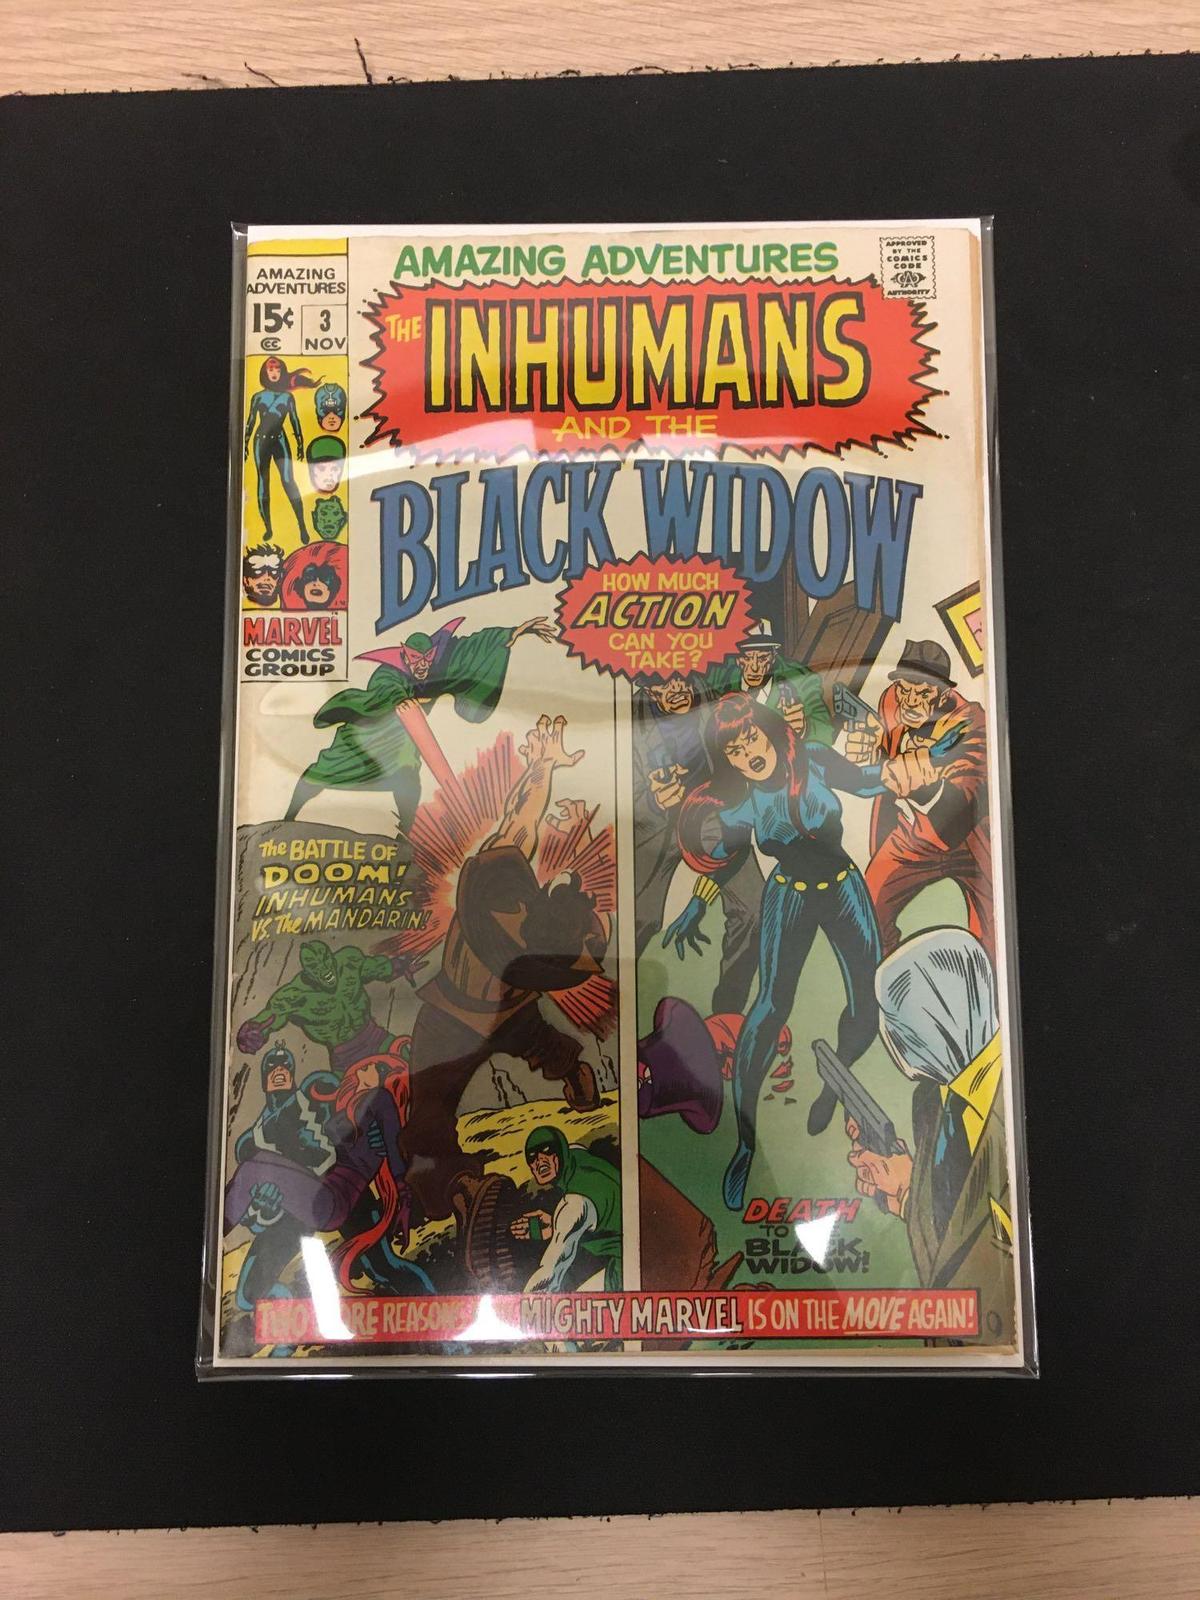 Amazing Adventures The Inhumans and Black Widow #3 Comic Book from Estate Collection